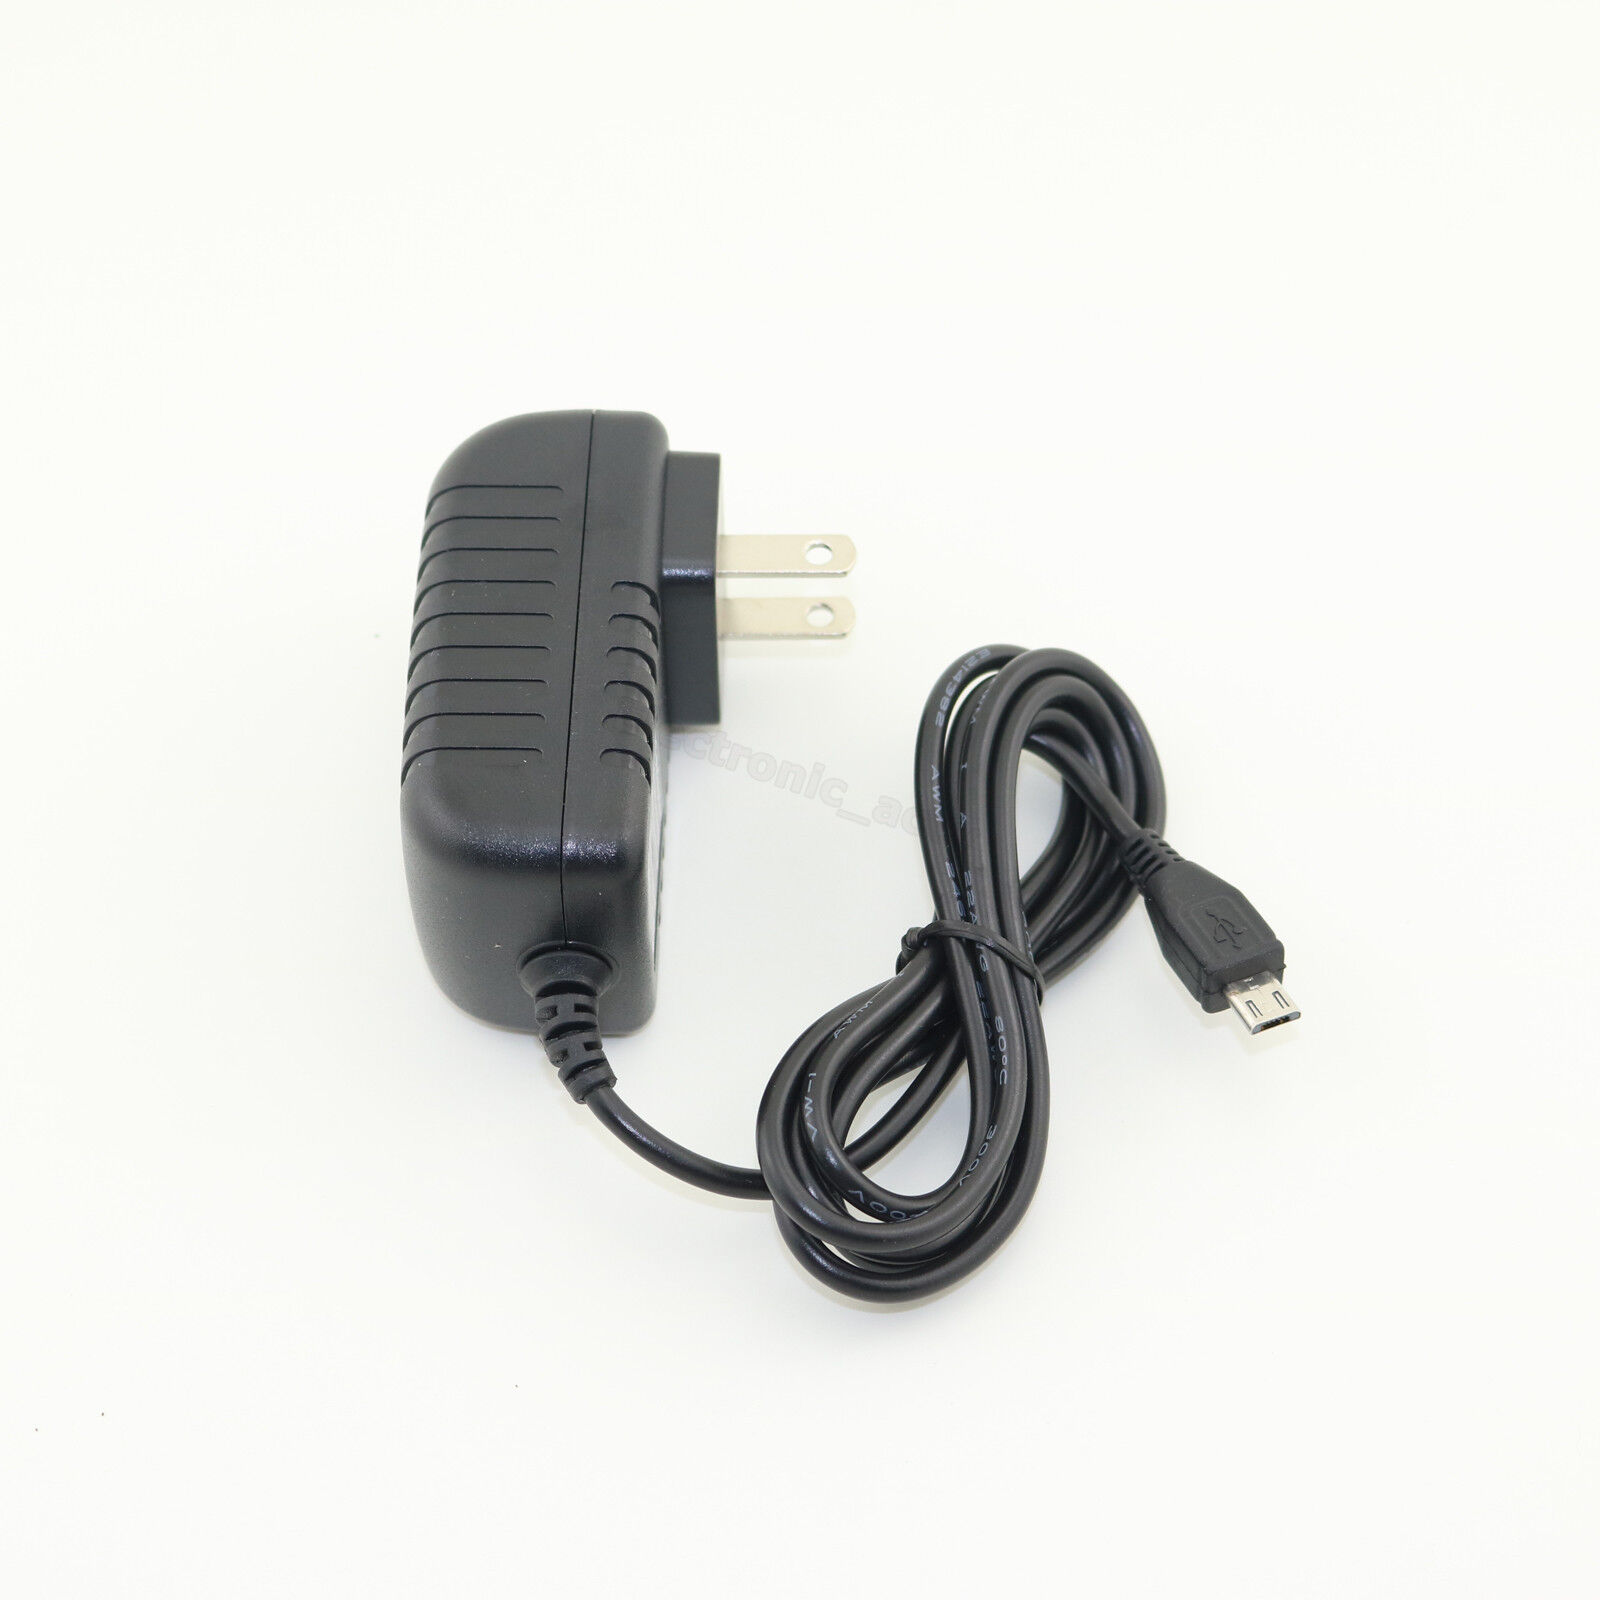 5V 2.5A Micro USB Power Converter Adapter Wall Charger for Raspberry Pi B+ 2 3 Type: AC/DC Adapter MPN: Does Not App - Click Image to Close